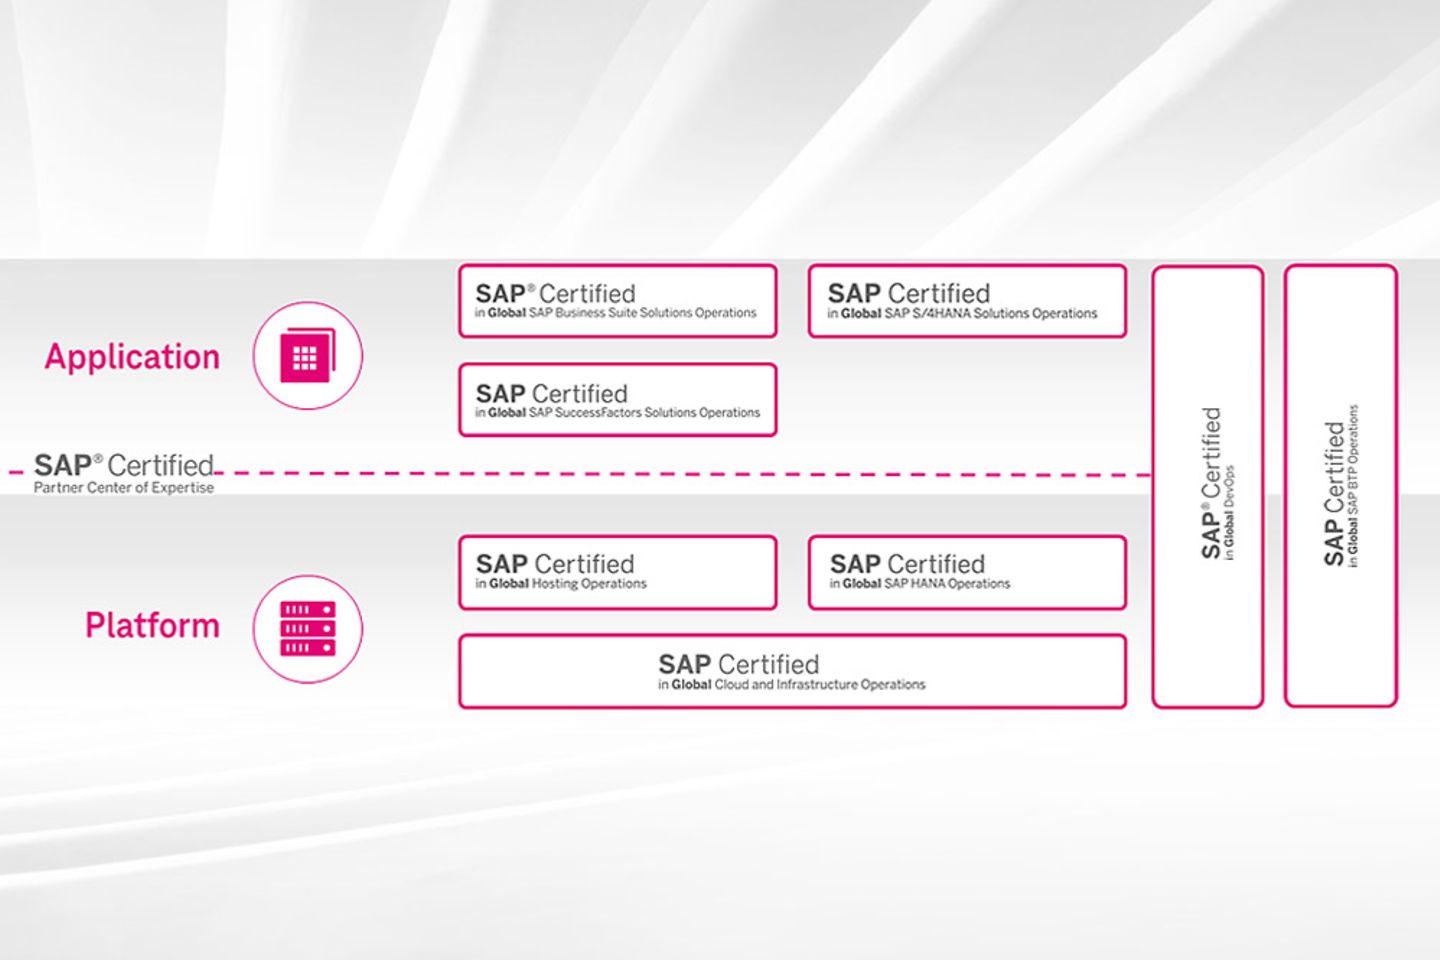 Infographic with an overview of SAP certificates